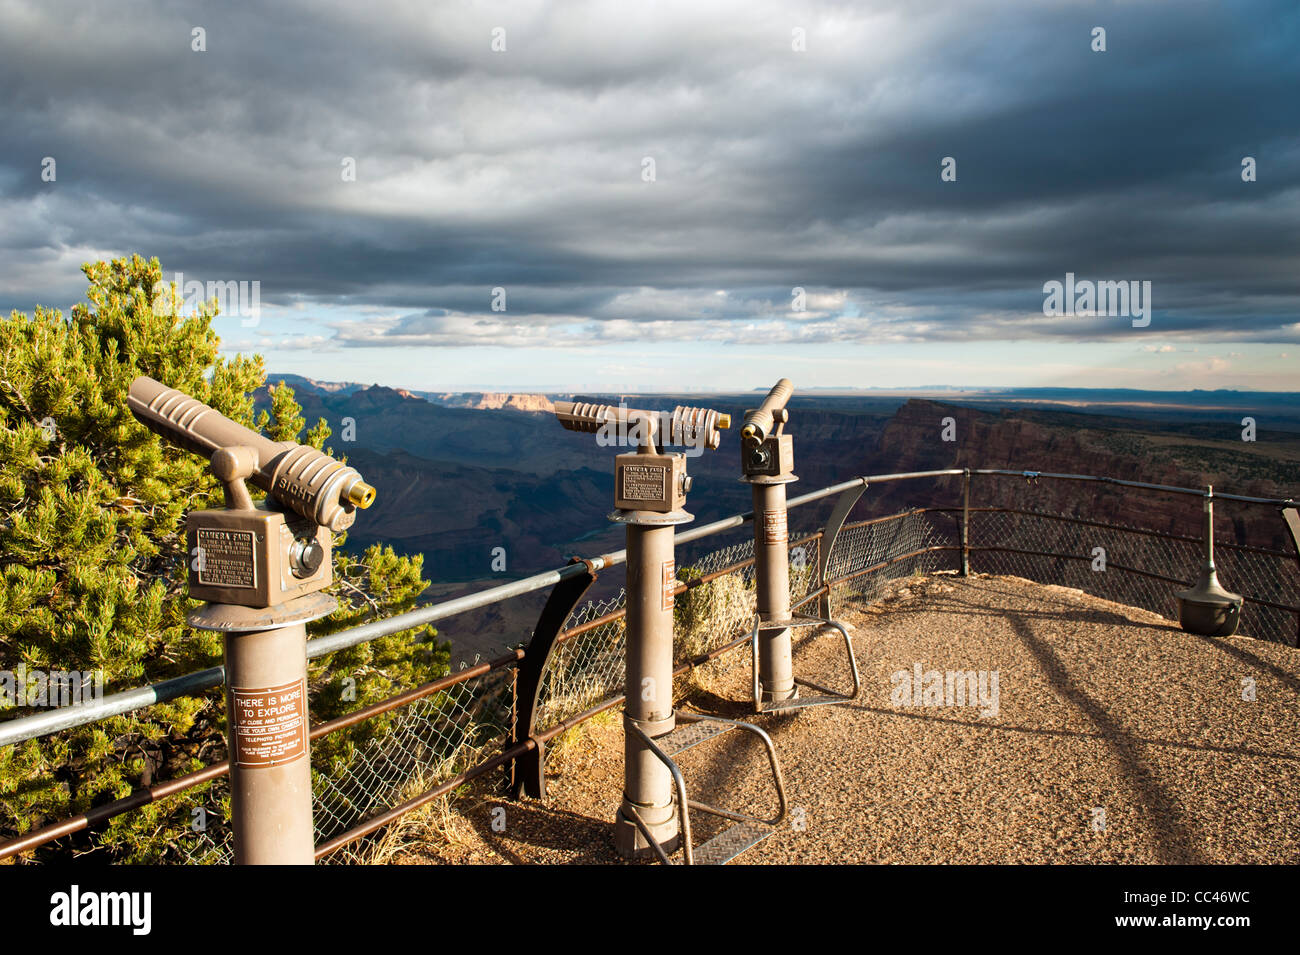 An observation point with telescopes at the South Rim of the Grand Canyon, Arizona. Stock Photo